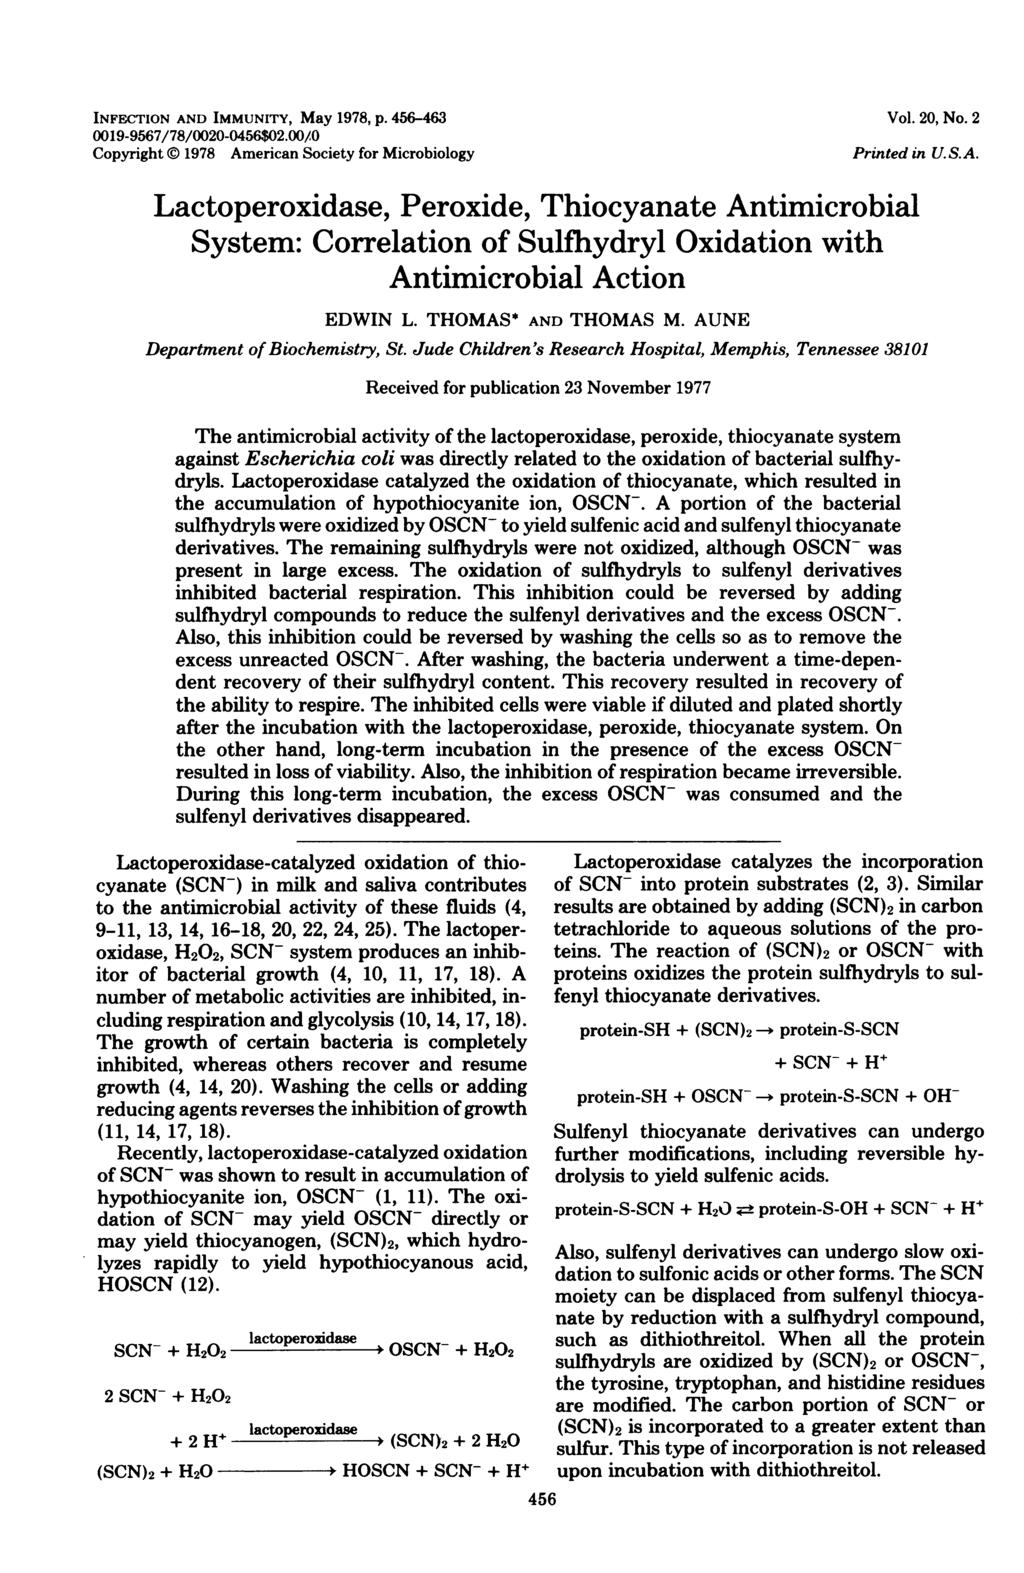 INFECTION AND IMMUNITY, May 1978, p. 456-463 19-9567/78/2-456$2./ Copyright 1978 American Society for Microbiology Vol. 2, No. 2 Printed in U.S.A. Lactoperoxidase, Peroxide, Thiocyanate Antimicrobial System: Correlation of Sulfhydryl Oxidation with Antimicrobial Action EDWIN L.